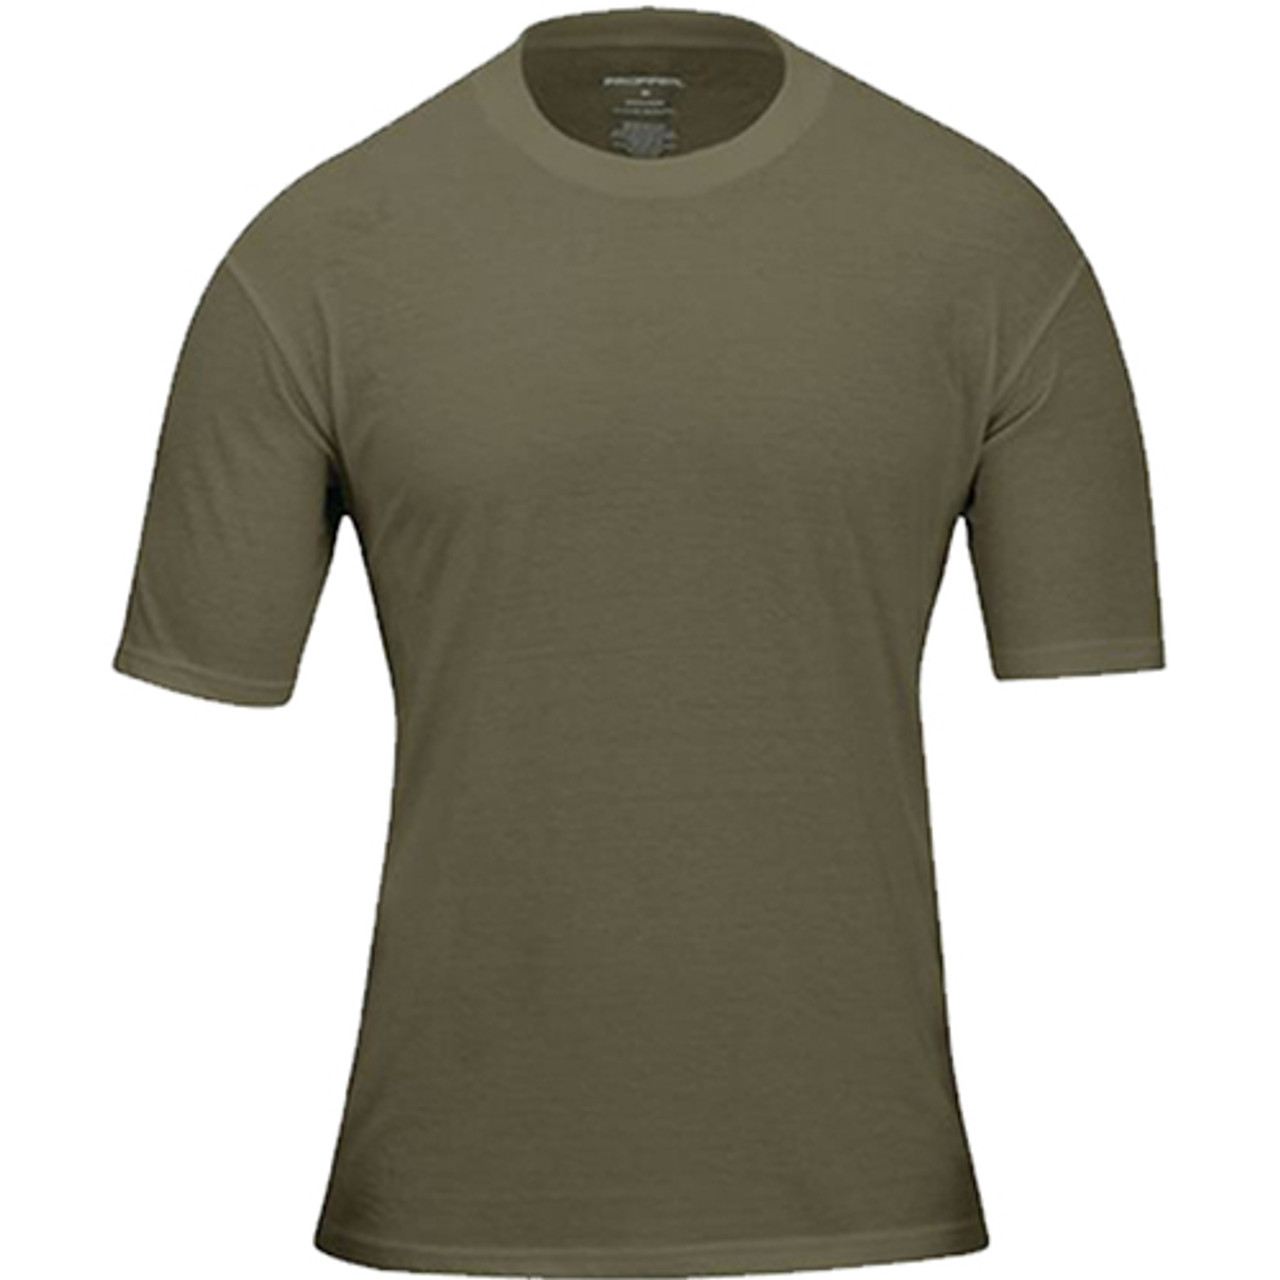 Propper Men's T-Shirt, 3-Pack, Short Sleeve, 60% Cotton and 40% Polyester, Clean, neat and professional apperance, available in Black, Light Tan, LAPD Navy, Olive Green, Dark Tan, and White, Multi-Pack, F5306